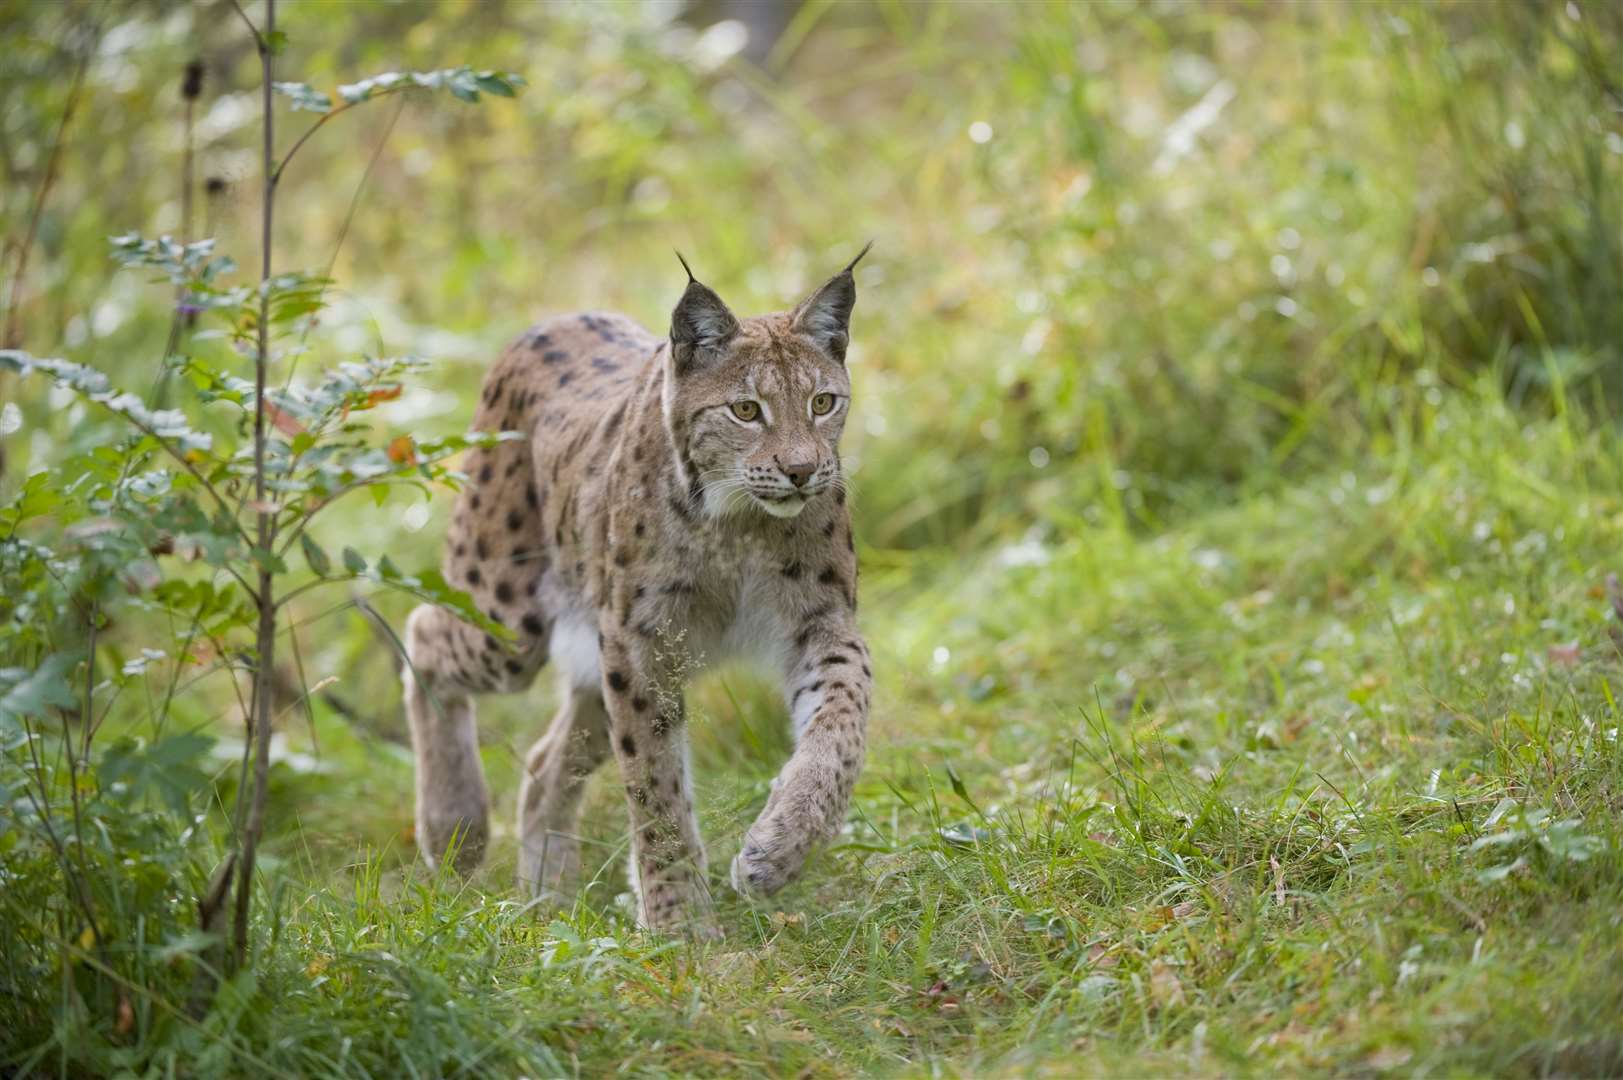 The charities involved in the project believe lynx can be successfully reintroduced in the Highlands. Picture: © scotlandbigpicture.com